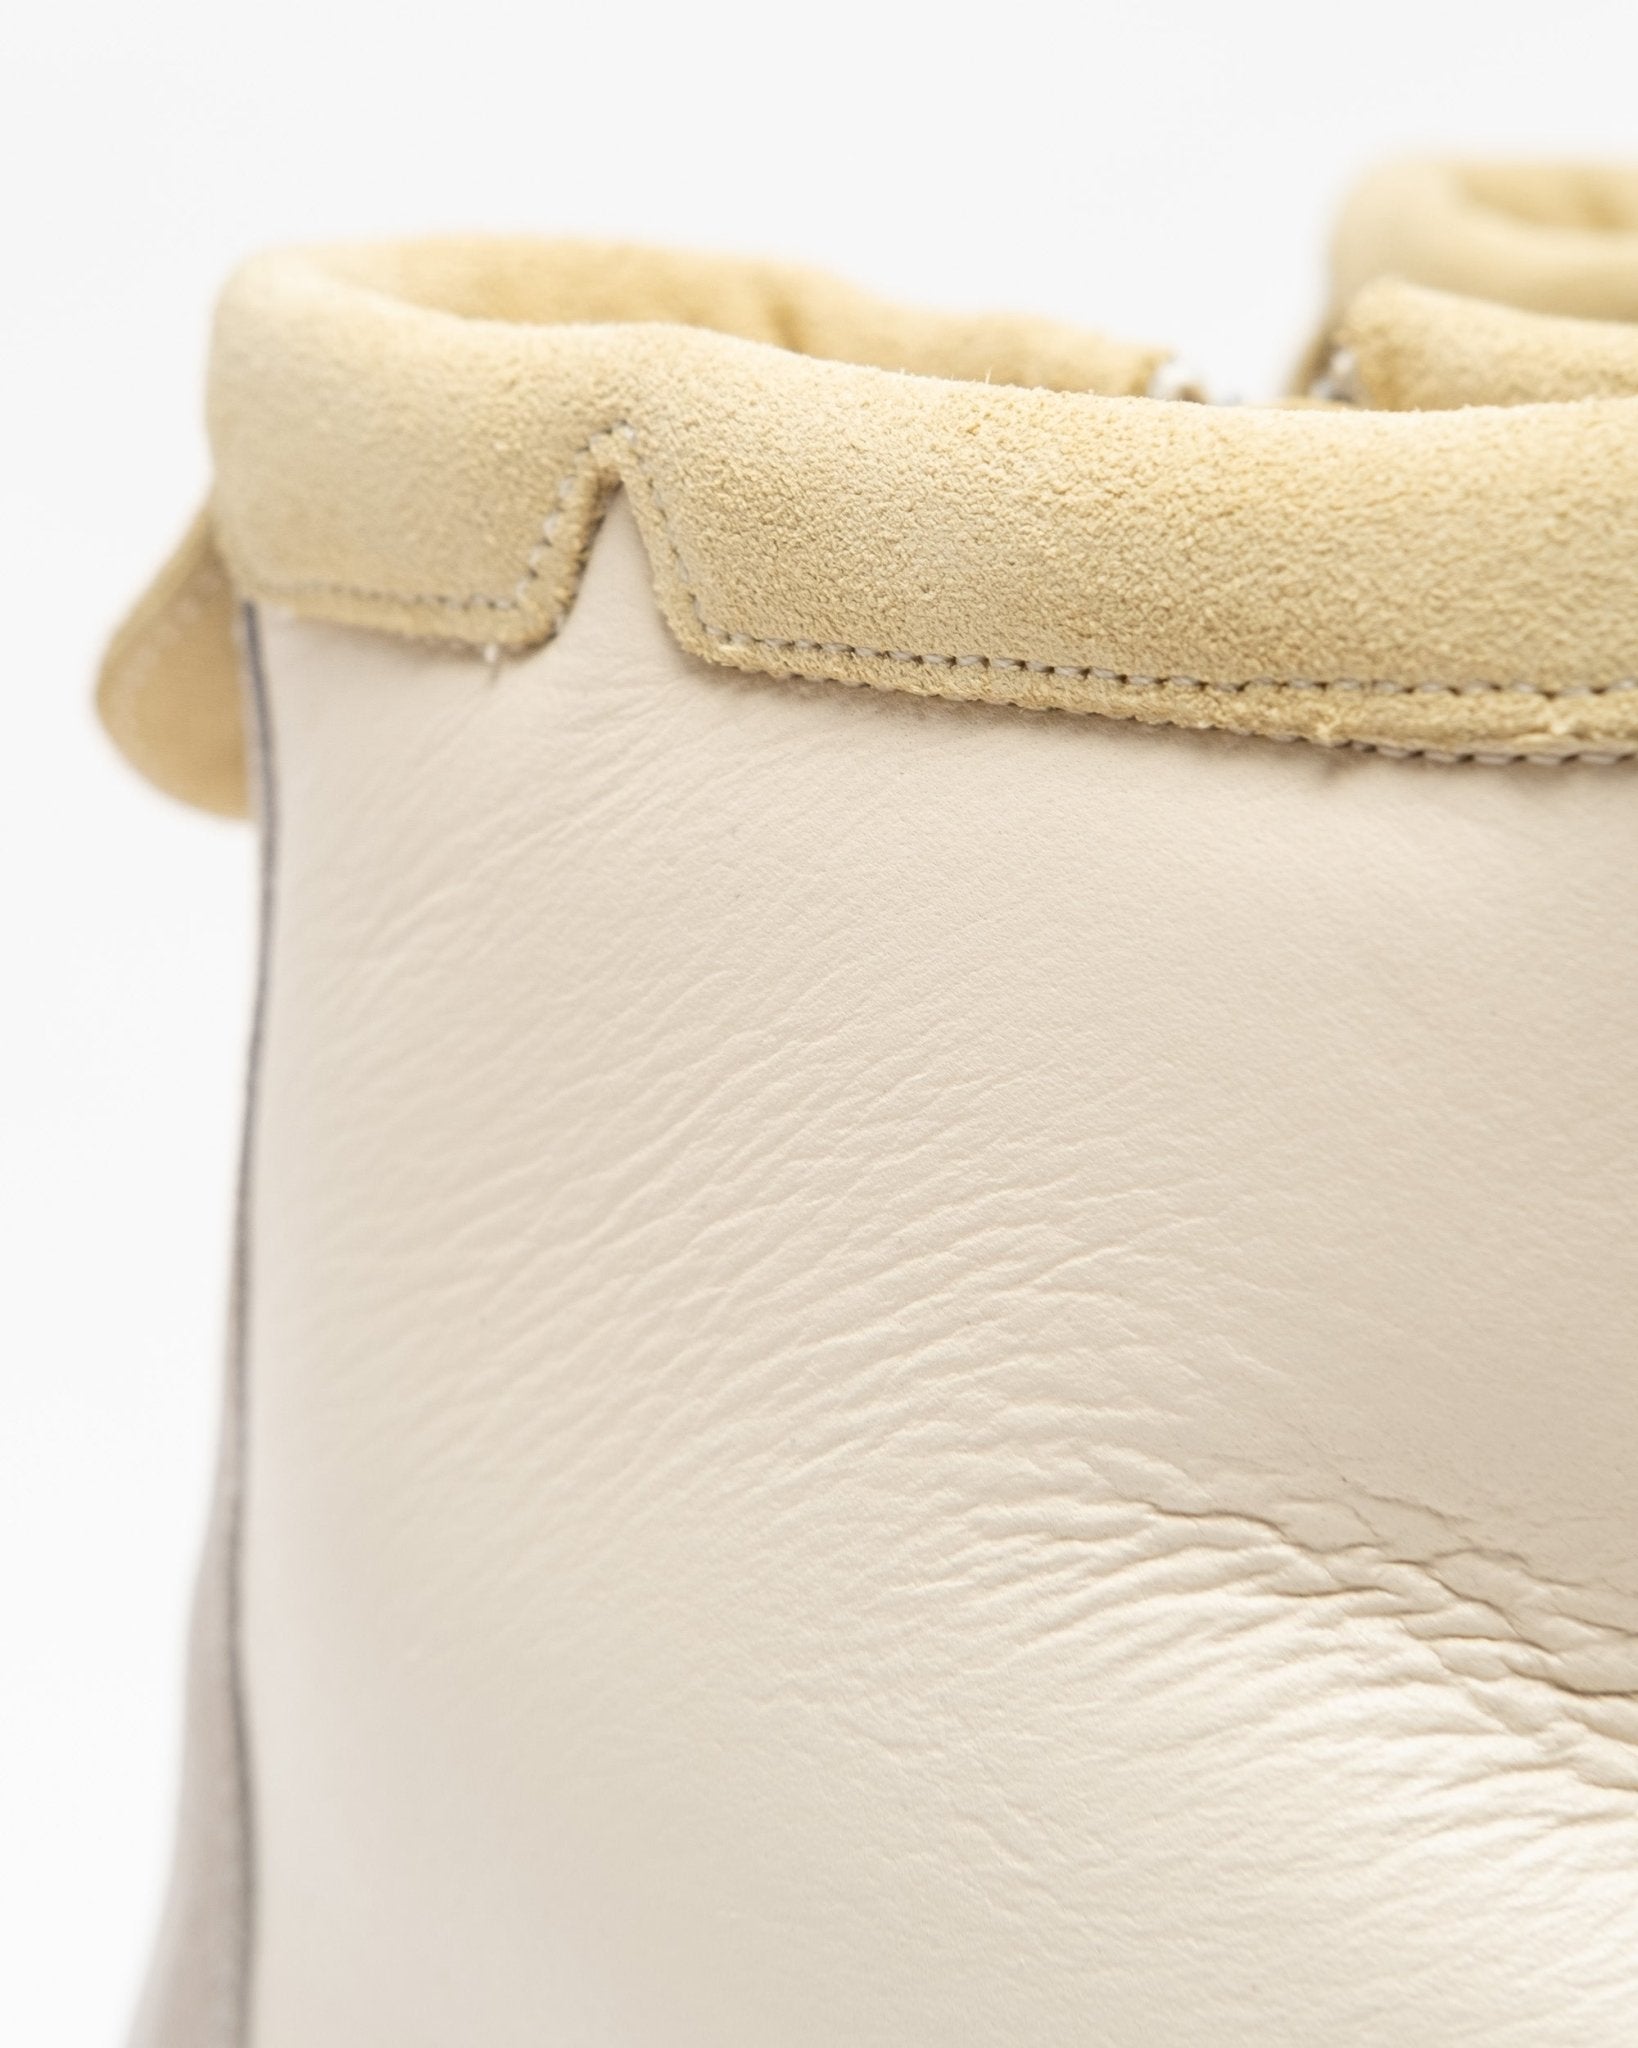 Our Legacy Yeti Boots Appear in White Shearling